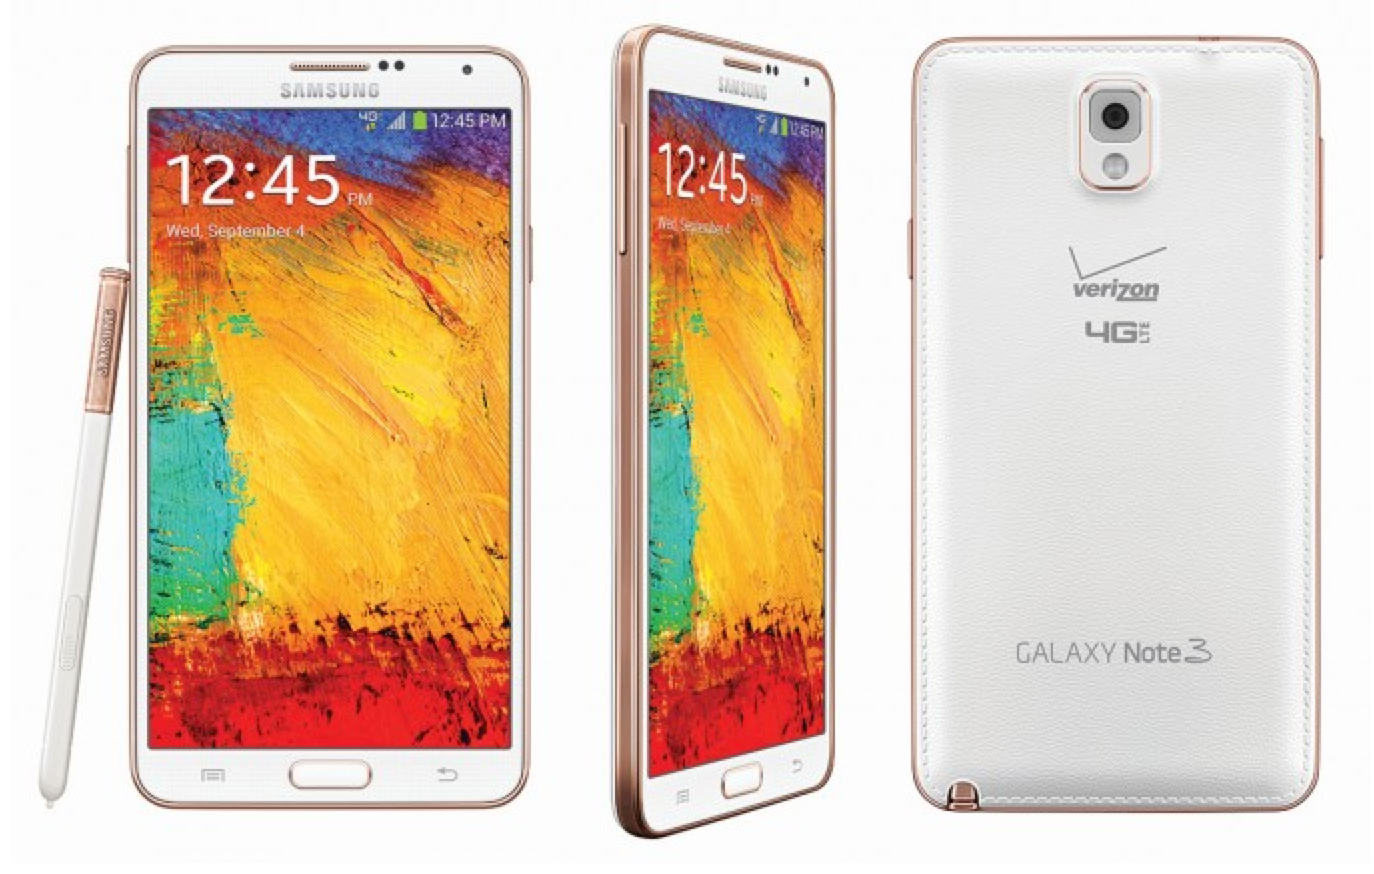 Samsung Galaxy Note 3 Review - Compsmag